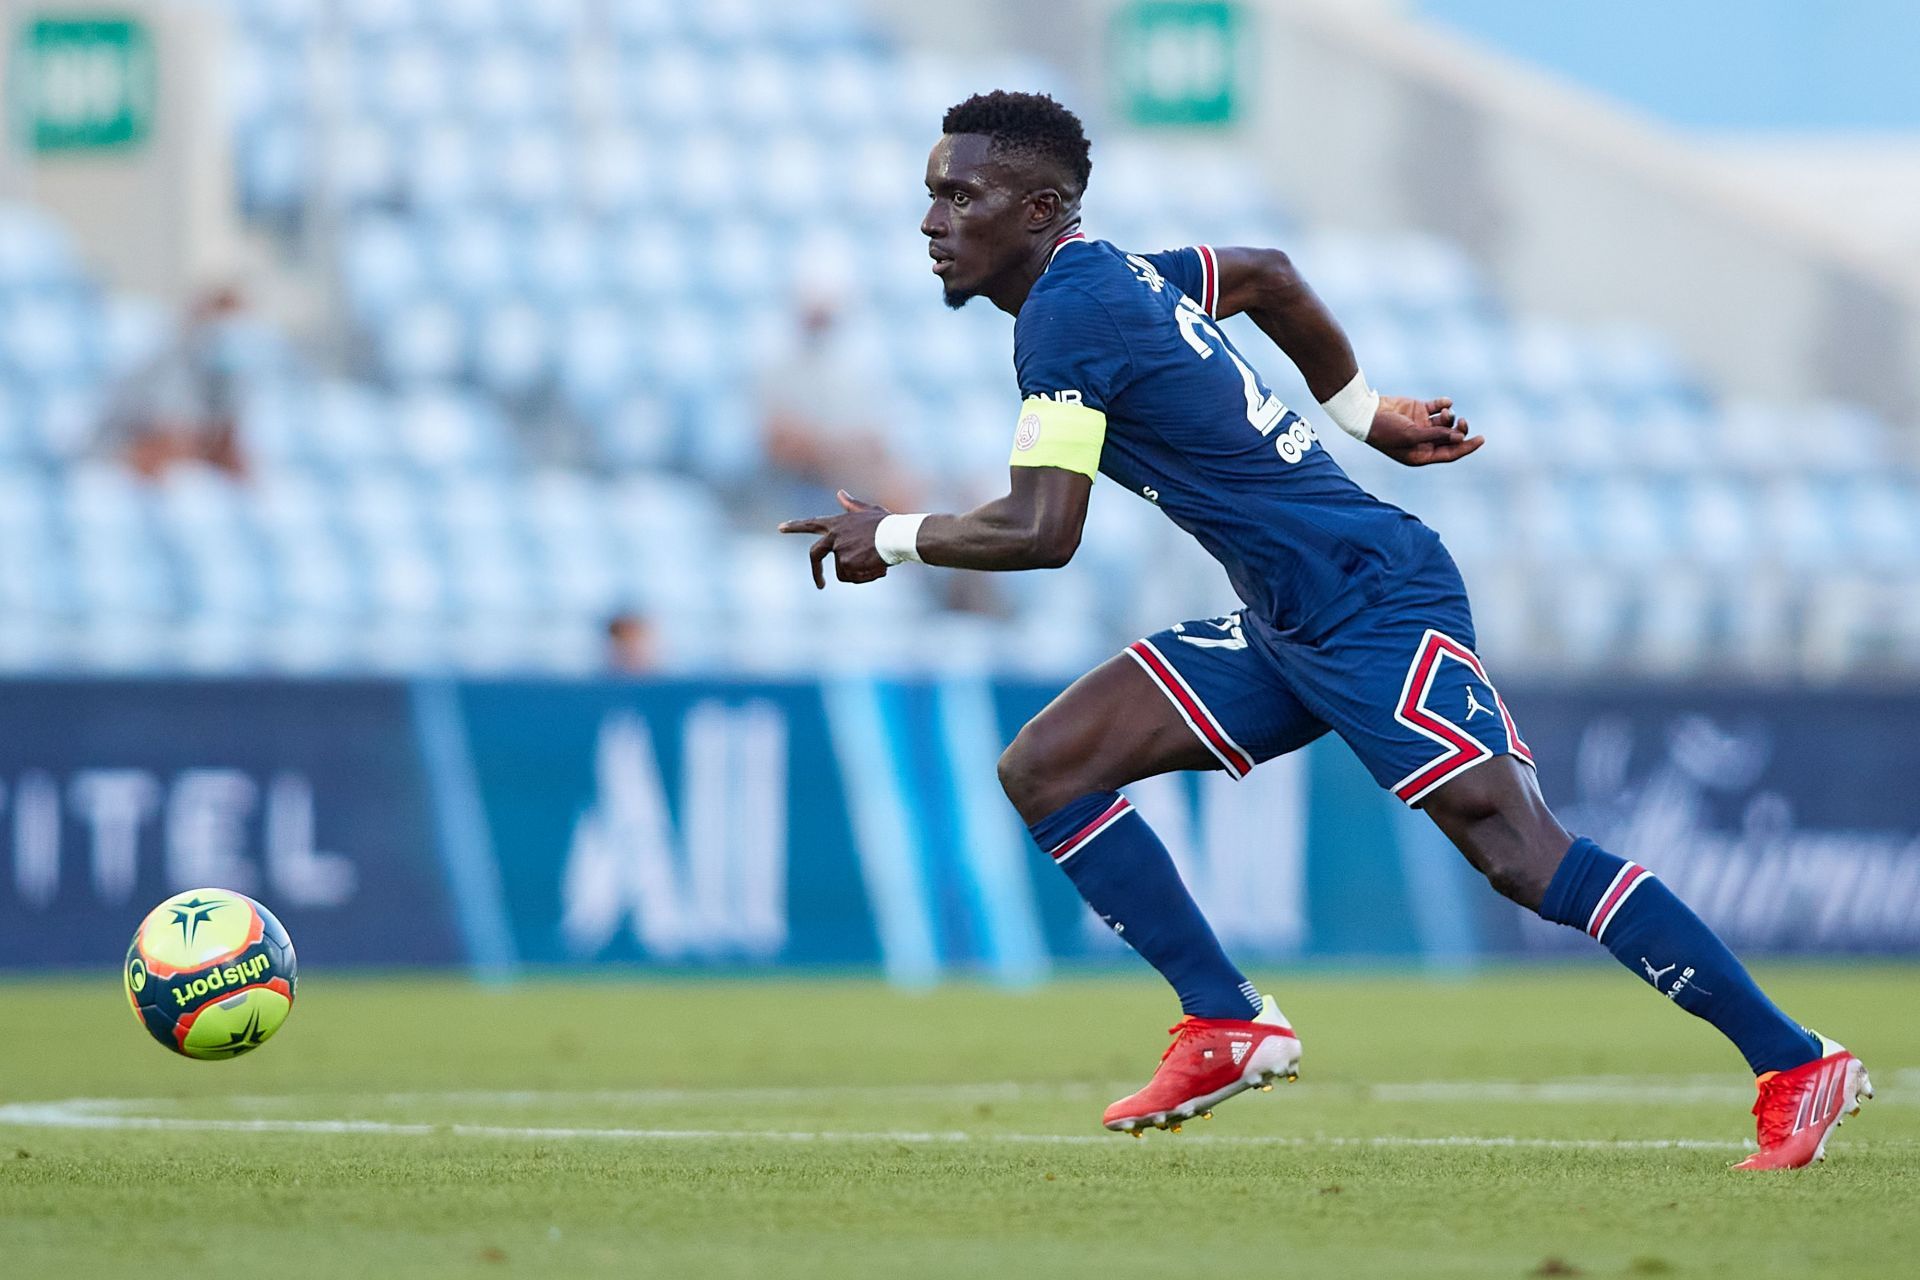 PSG midfielder Idrissa Gueye is one of the stars selected by Senegal for AFCON